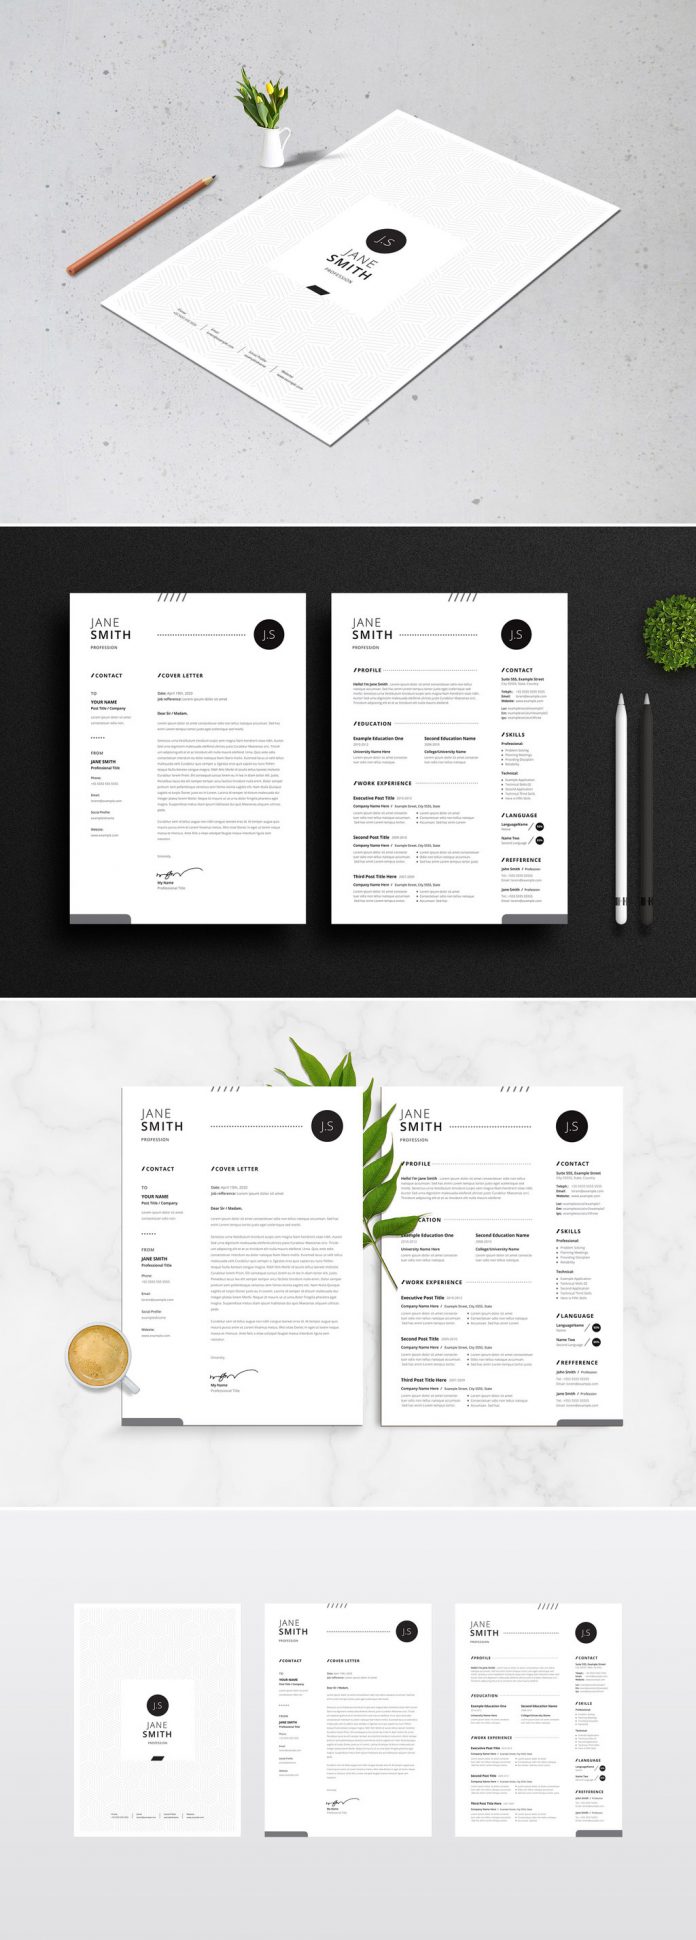 Black and White Resume and Cover Letter Template for Adobe InDesign